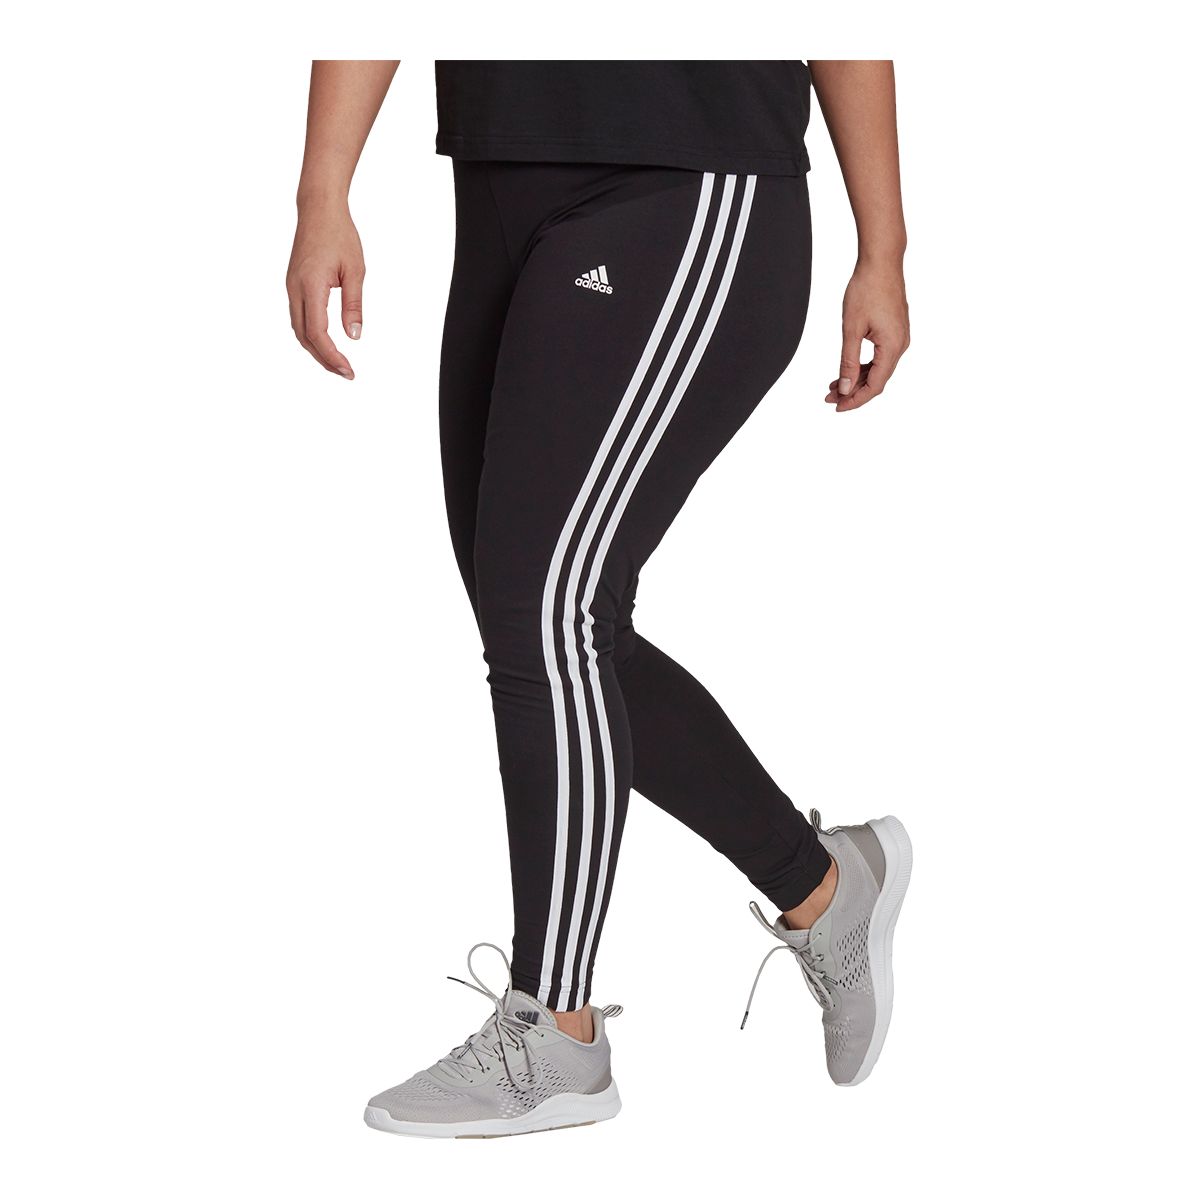 Buy Adidas Designed to Move High-Rise 3-Stripes 7/8 Sport Leggings (HK9951)  Team Real Magenta from £11.00 (Today) – Best Deals on idealo.co.uk